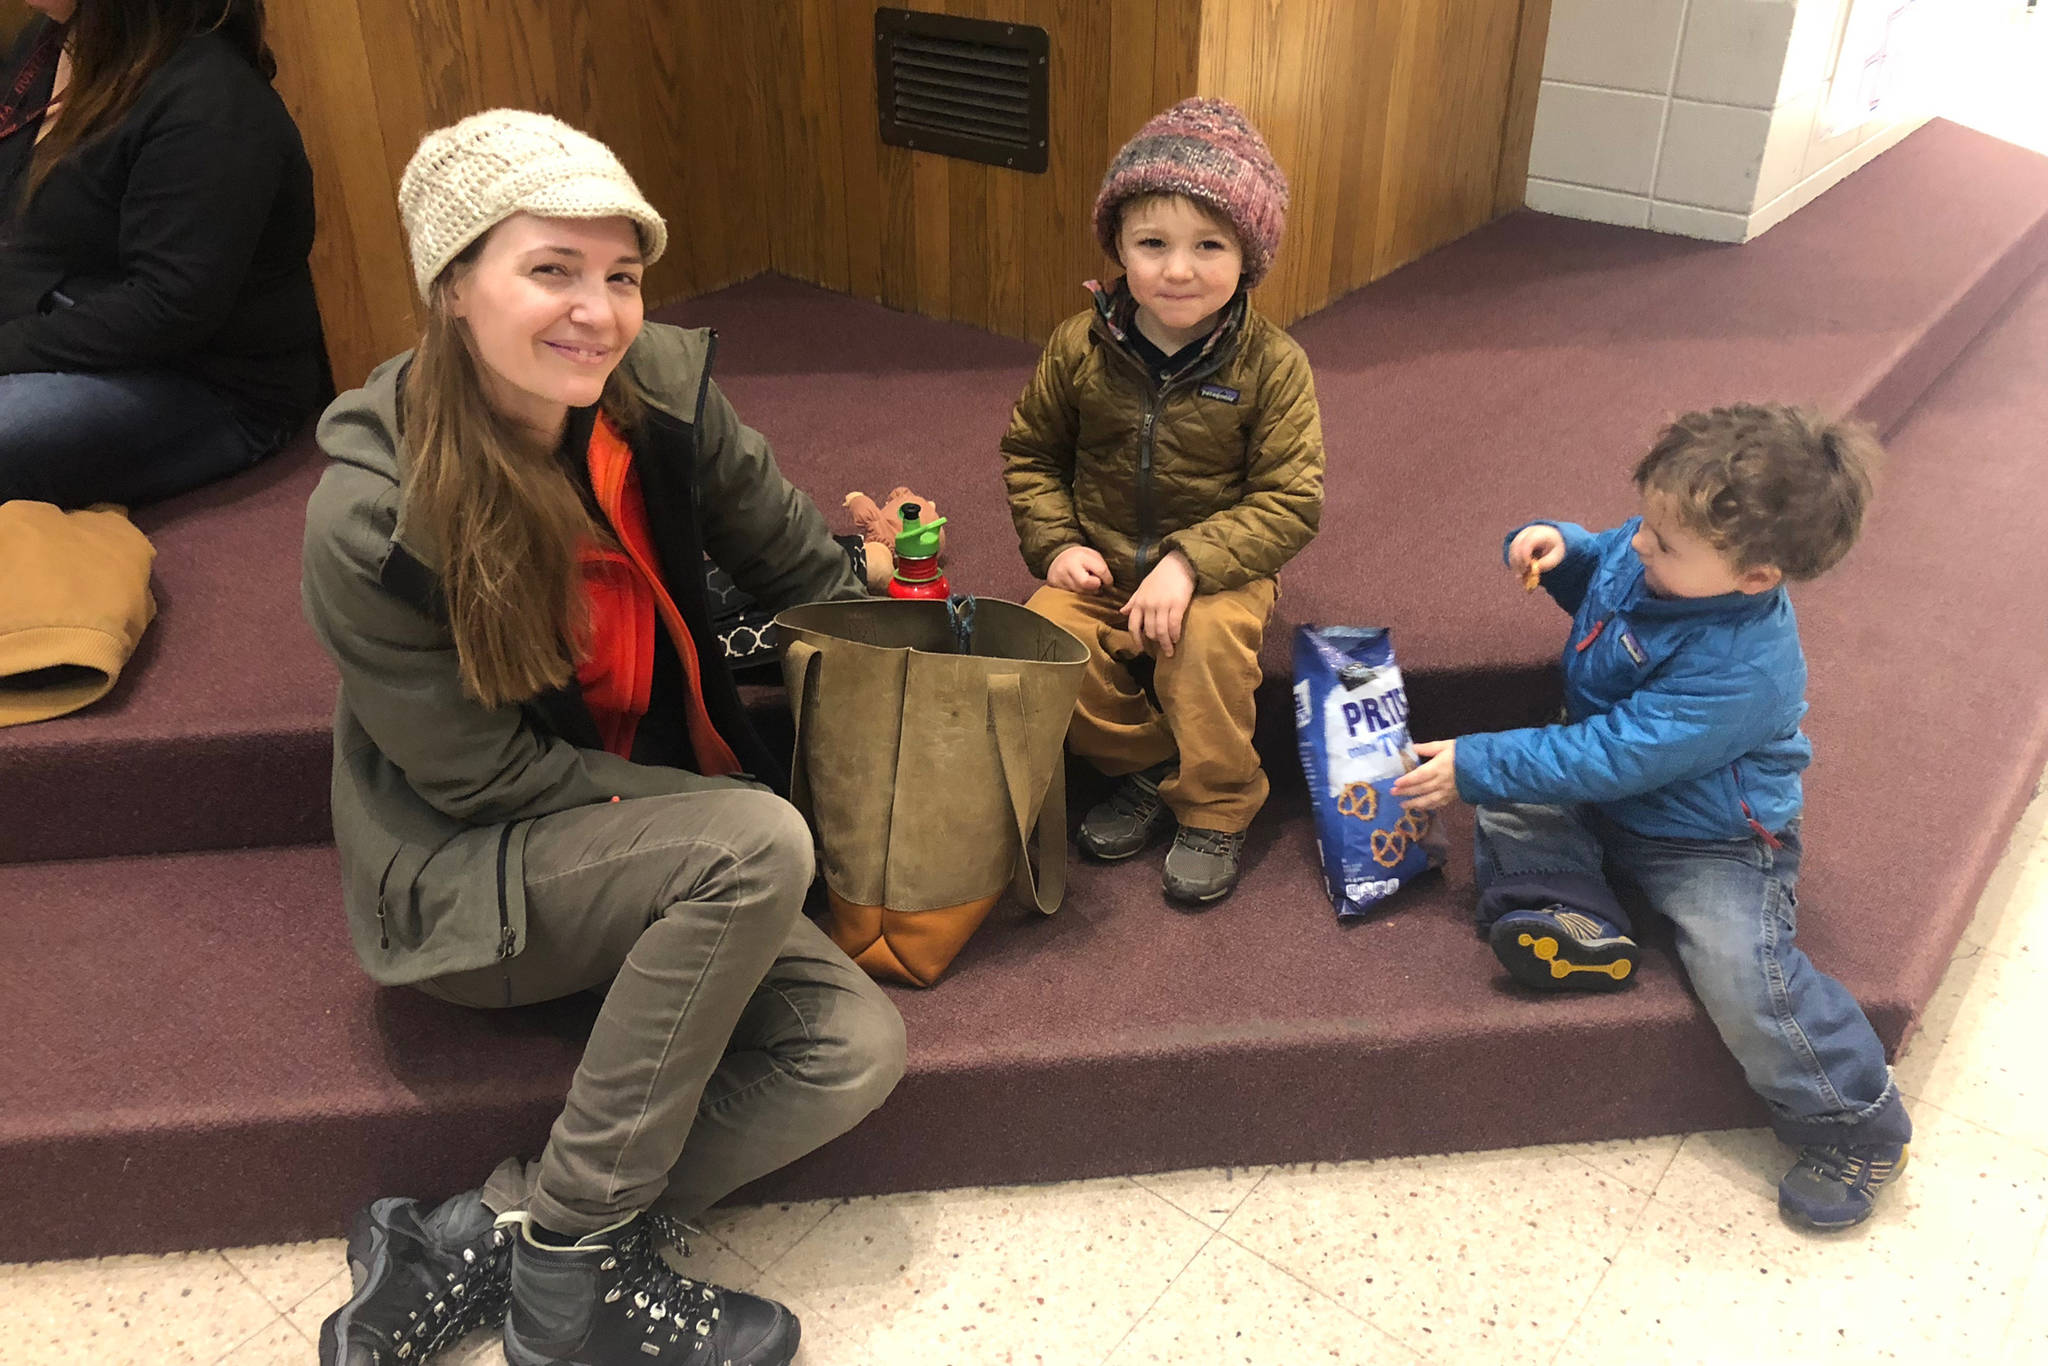 Katie Bower sits with her two children, Frederick and Lawrence, at the Homer High School, which was opened as a shelter after a 7 magnitude earthquake Friday, Nov. 30, 2018 in Homer, Alaska. A tsunami warning was issued for the Southern Kenai Peninsula but was lifted shortly after. (Photo by Renee Gross, KBBI)